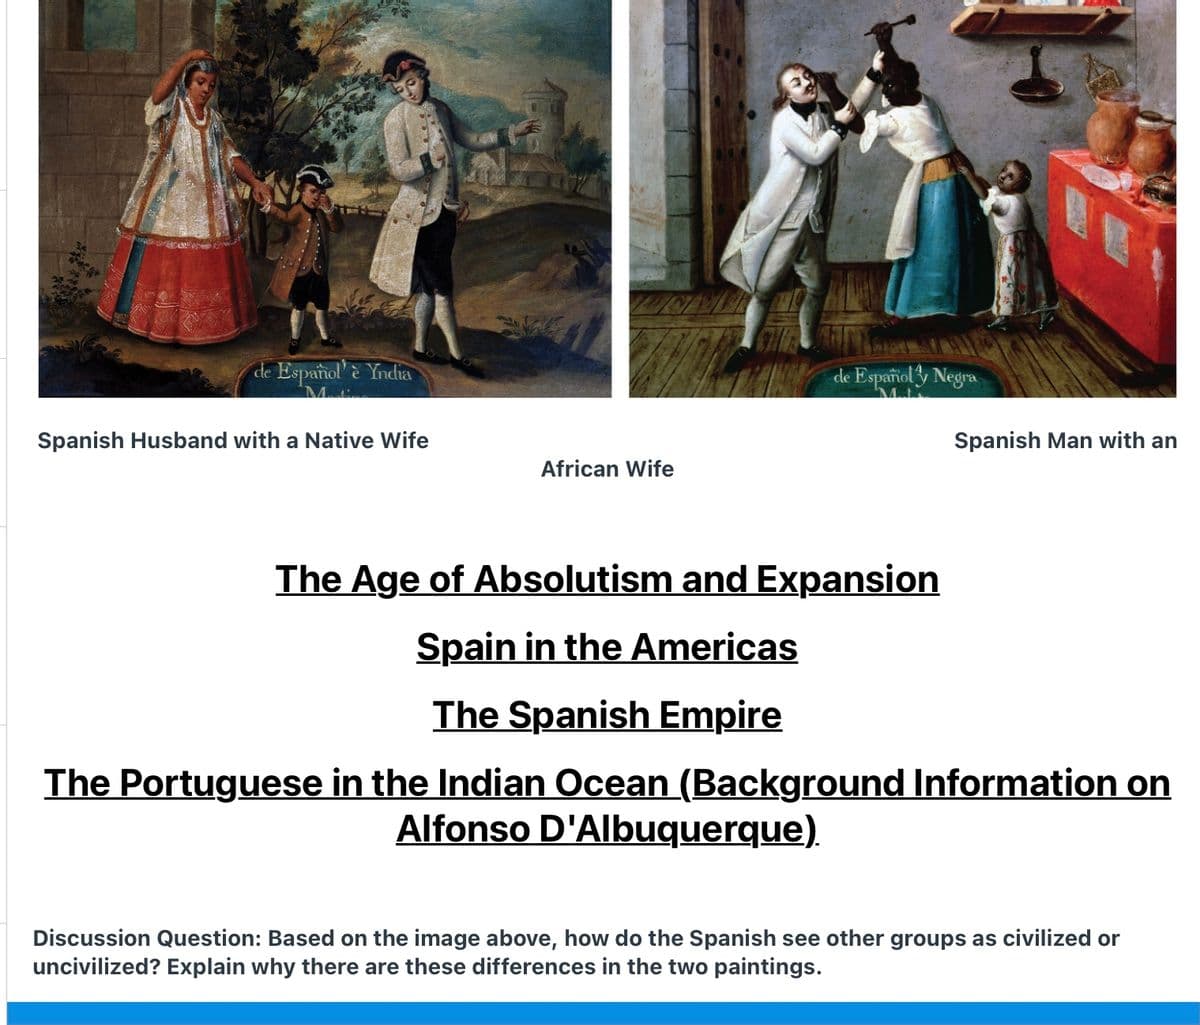 de Español è Yndia
de Español y Negra
Spanish Husband with a Native Wife
Spanish Man with an
African Wife
The Age of Absolutism and Expansion
Spain in the Americas
The Spanish Empire
The Portuguese in the Indian Ocean (Background Information on
Alfonso D'Albuquerque).
Discussion Question: Based on the image above, how do the Spanish see other groups as civilized or
uncivilized? Explain why there are these differences in the two paintings.
